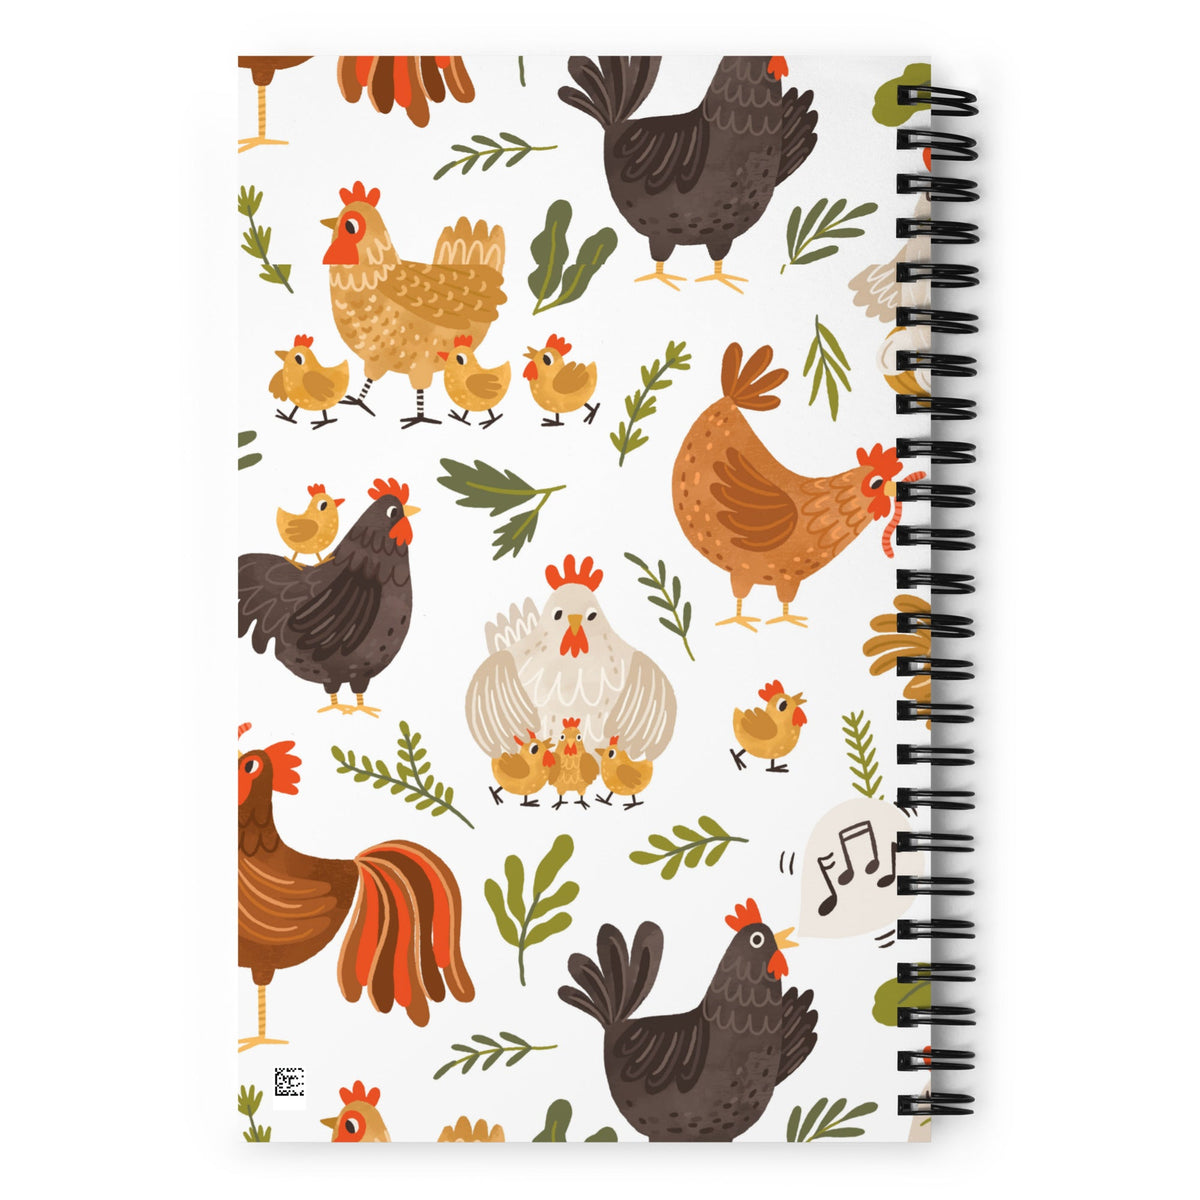 Whimsical Chicken Spiral Notebook - Cluck It All Farms